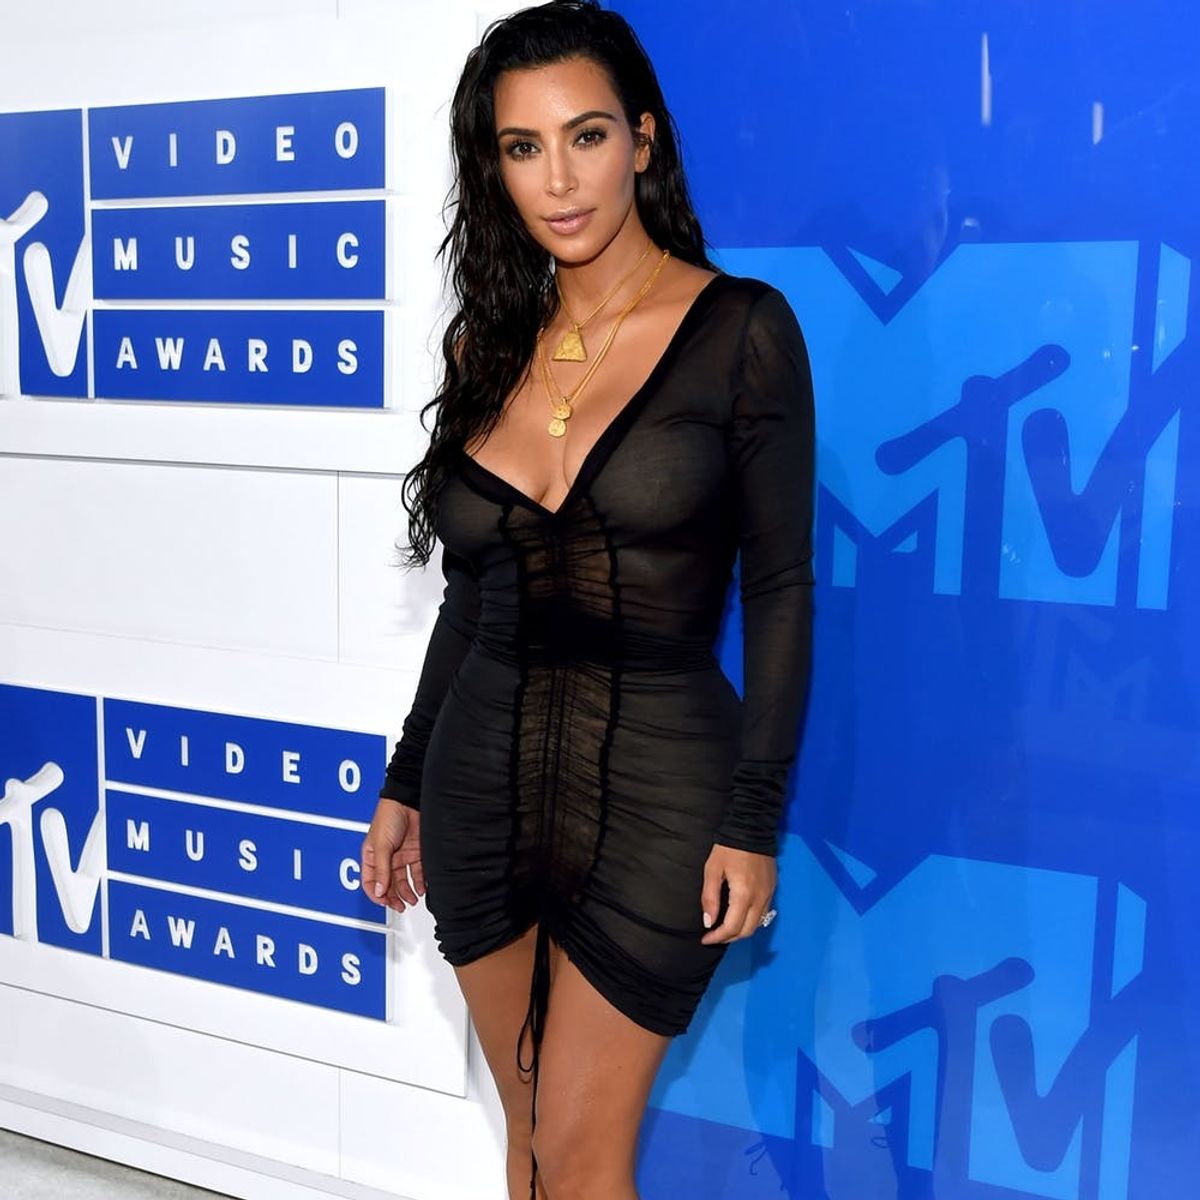 This Out-of-Style Look Seems to Be Dominating the 2016 VMAs